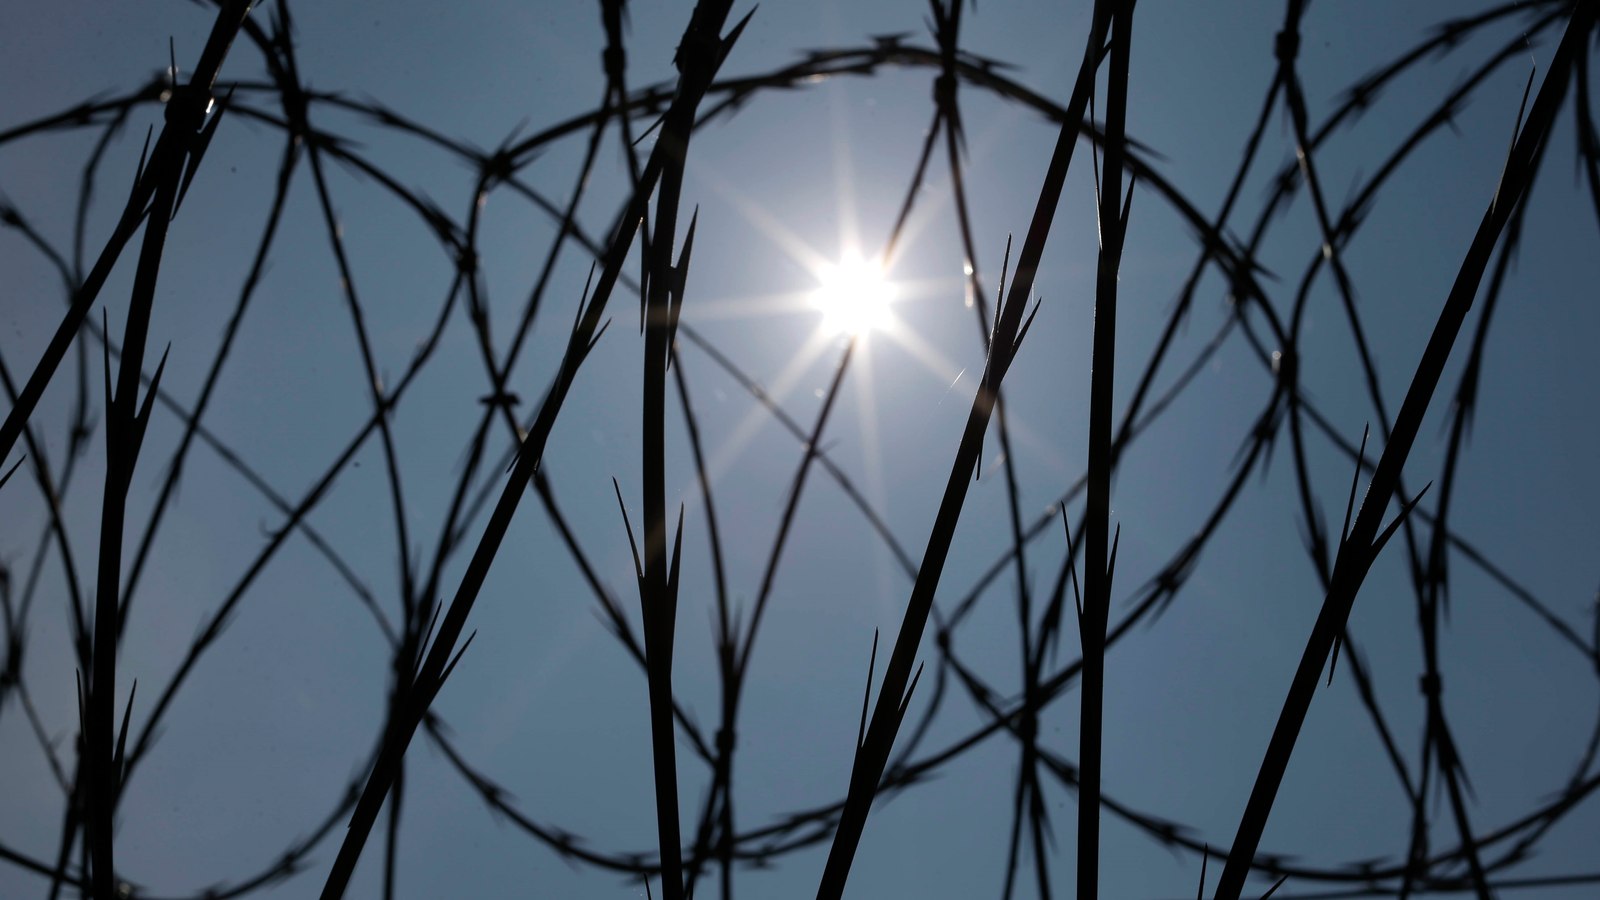 Unlike most Southern states, Louisiana is working to install air conditioning in prisons